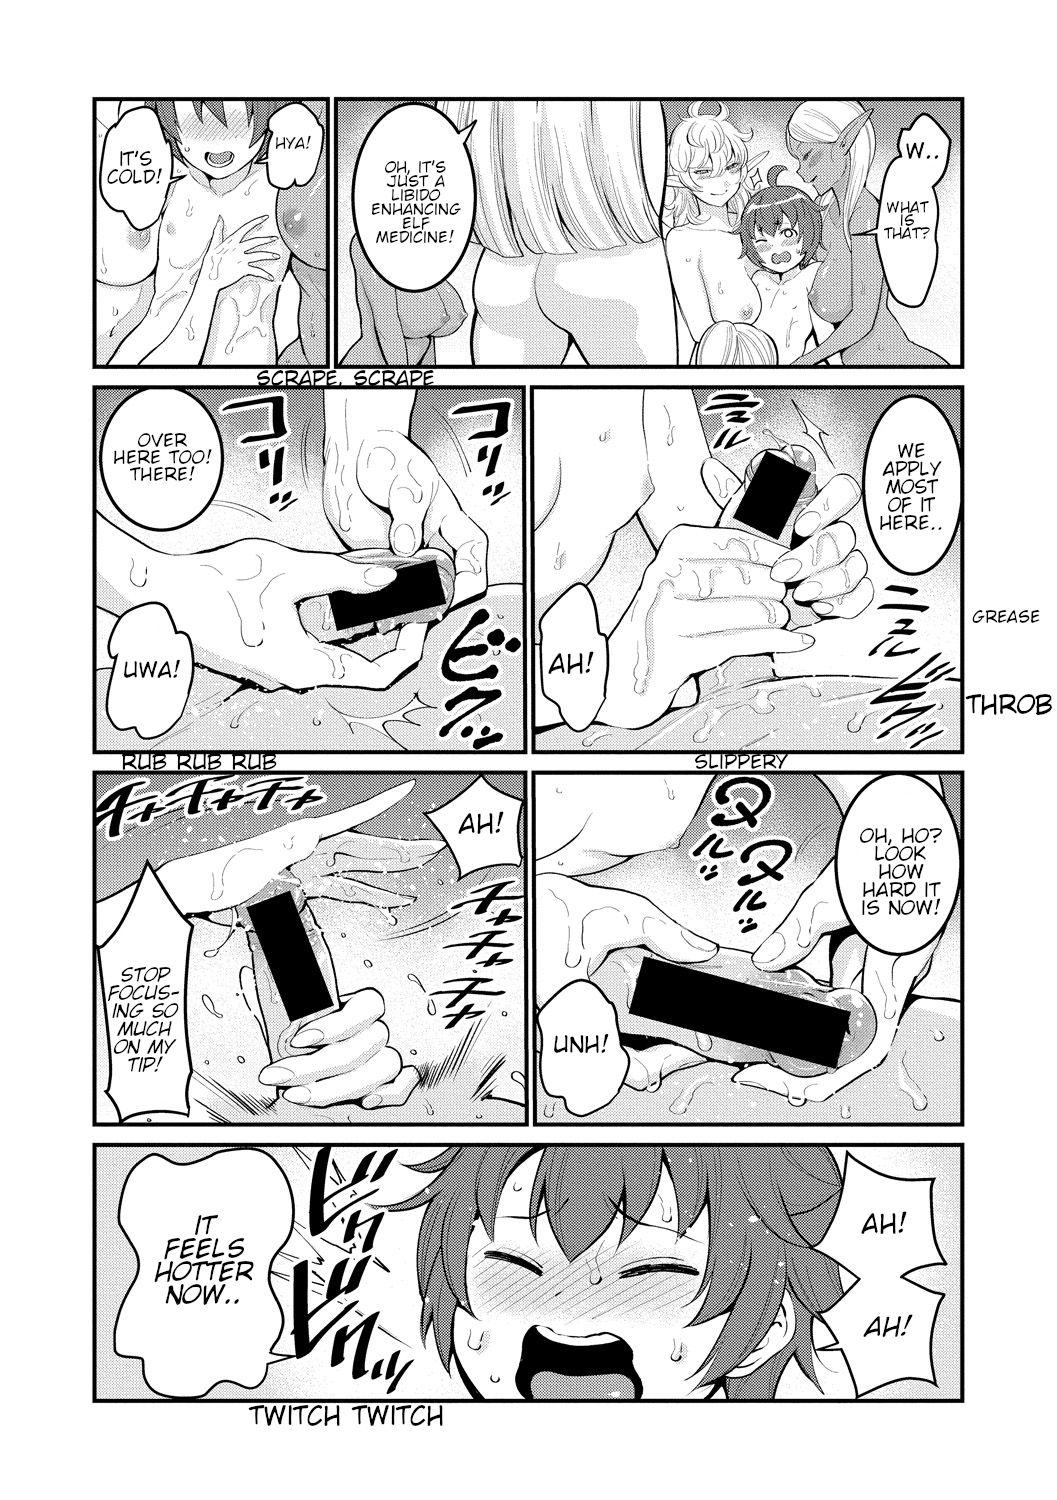 Suck Cock Chintore Quest II: Shota Yuusha Elf no Sato de Dai Rankou | Chintore Quest II: Shota Hero and the Great Elf Village Orgy Girlfriend - Page 12